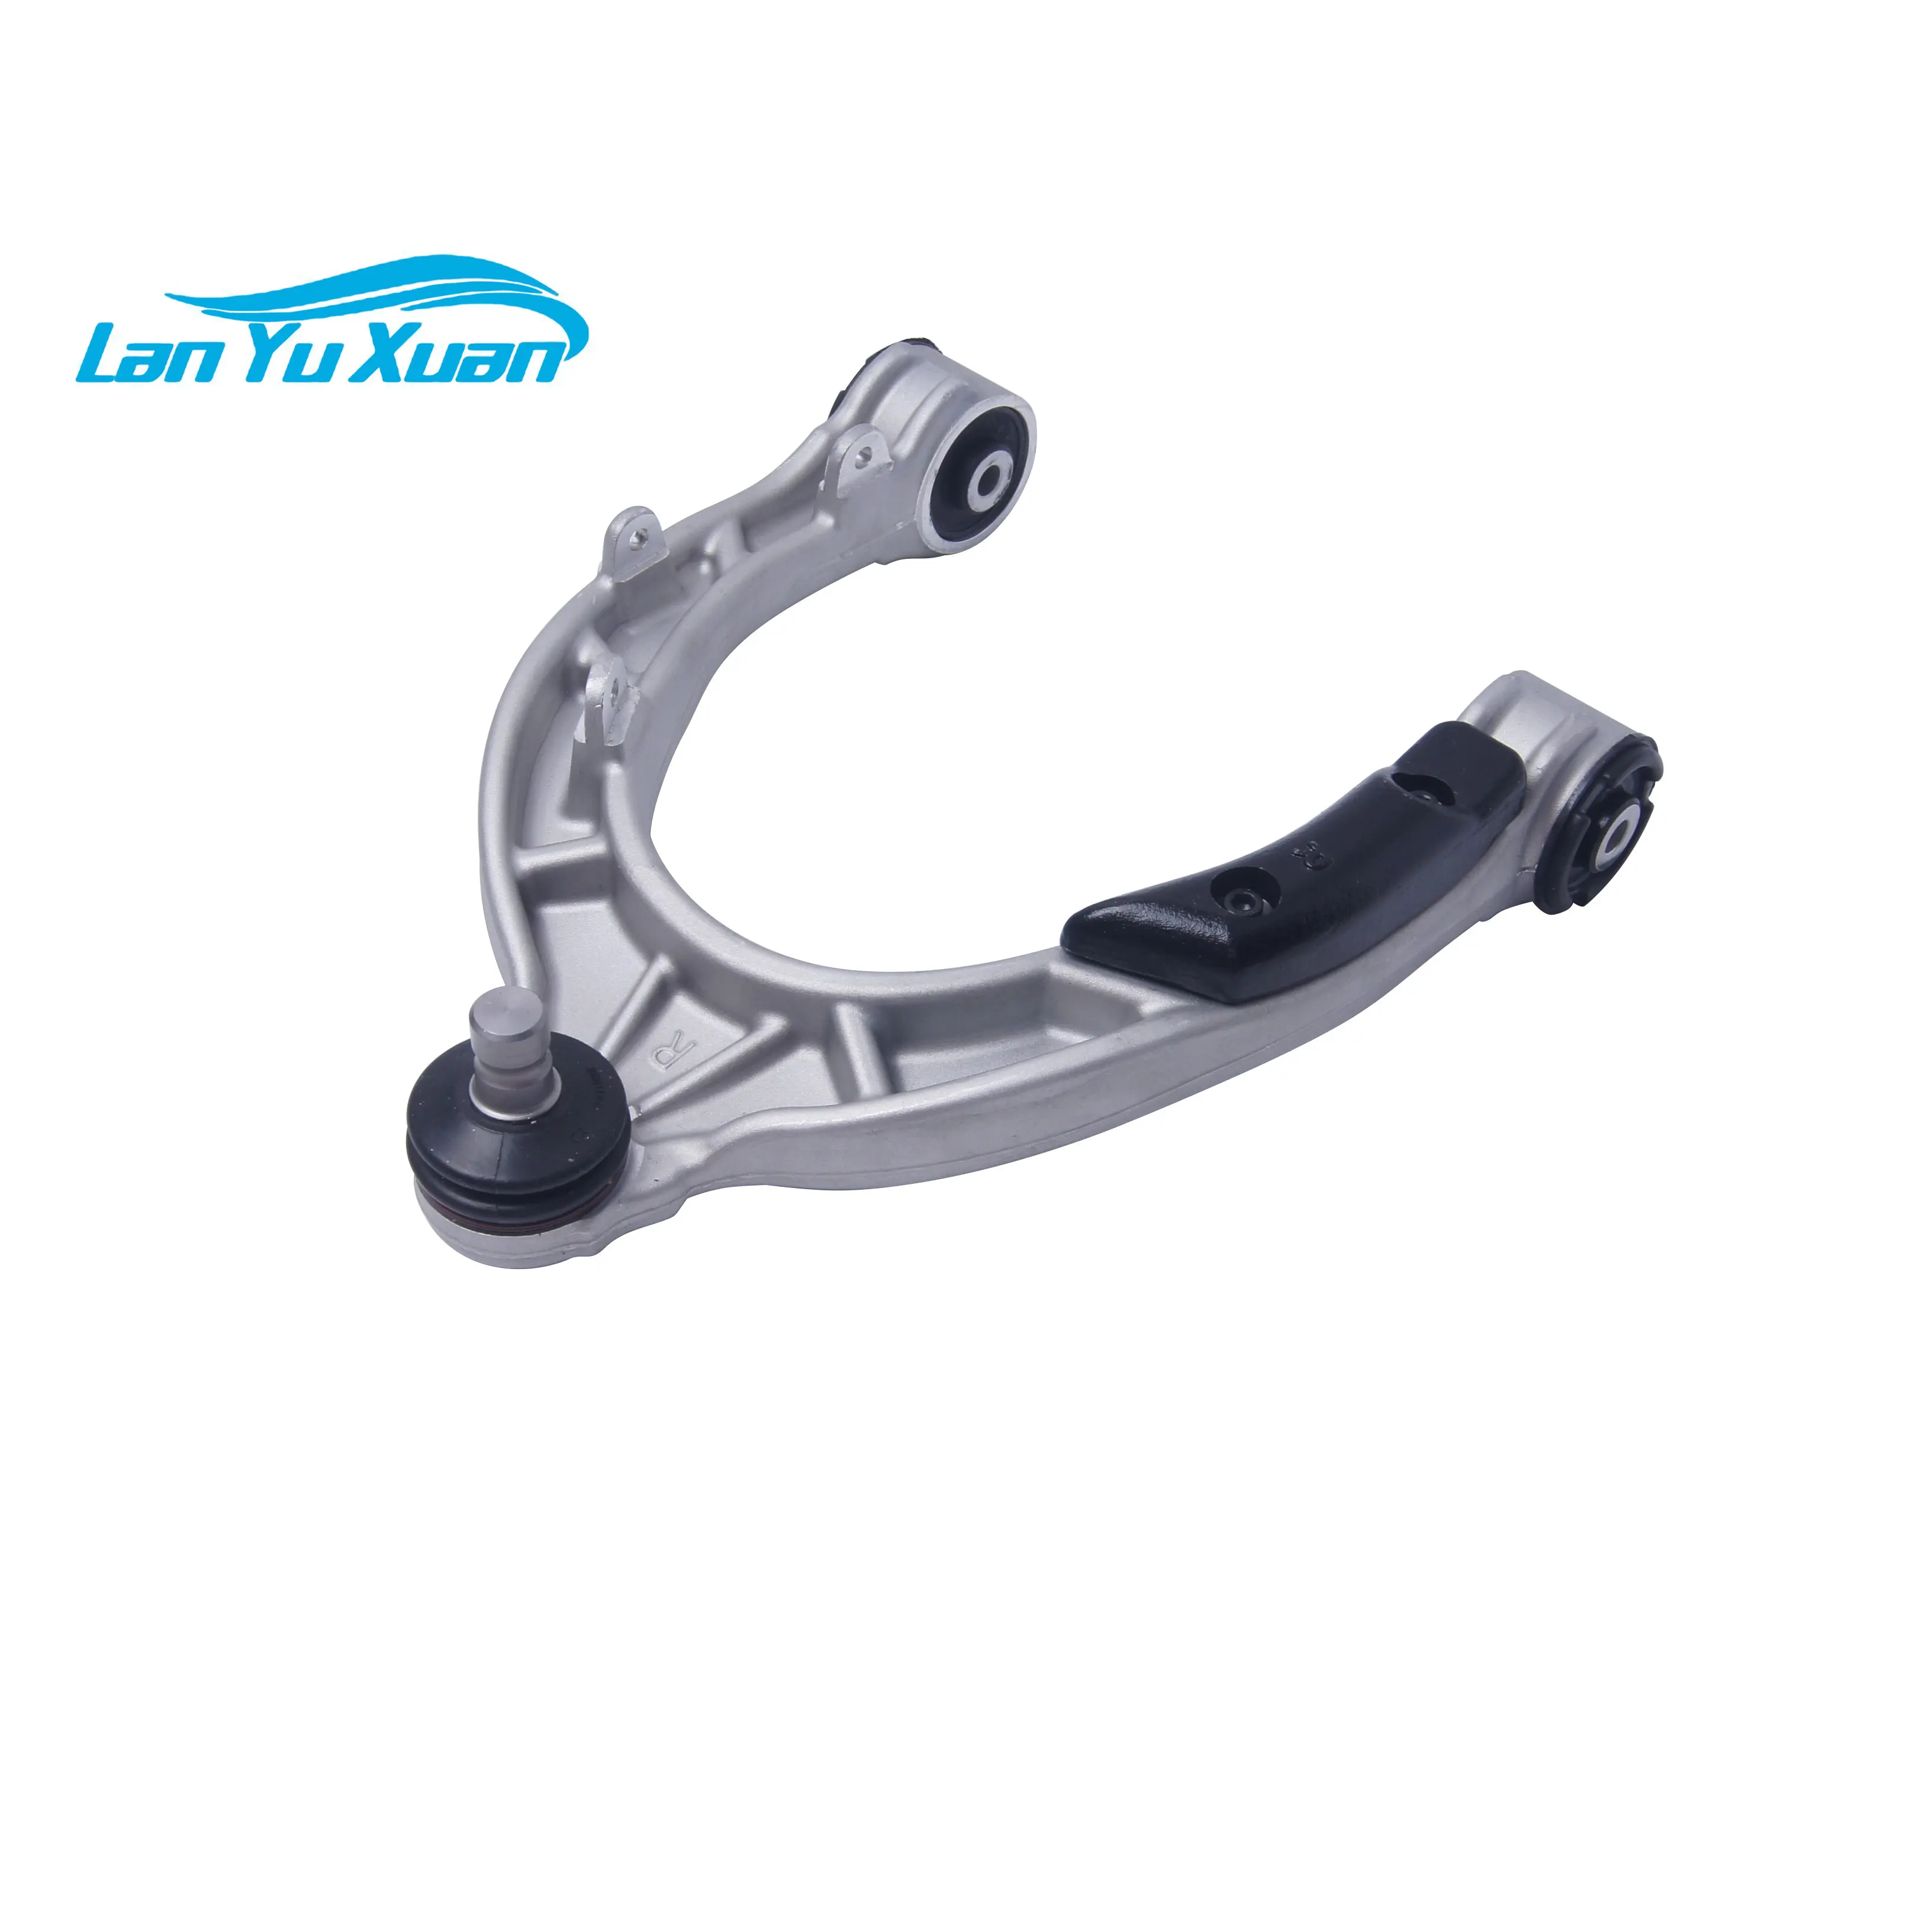 BF Brand OE 1044321-00-G 1044321-00-H Auto Suspension System Front Aluminum Control Arm for  Model 3 100% brand new original bm1362aa bm1362a bm1362 1362aa bm136 bm13 bm1 bm ic chip for antminer s19j pro s19i model